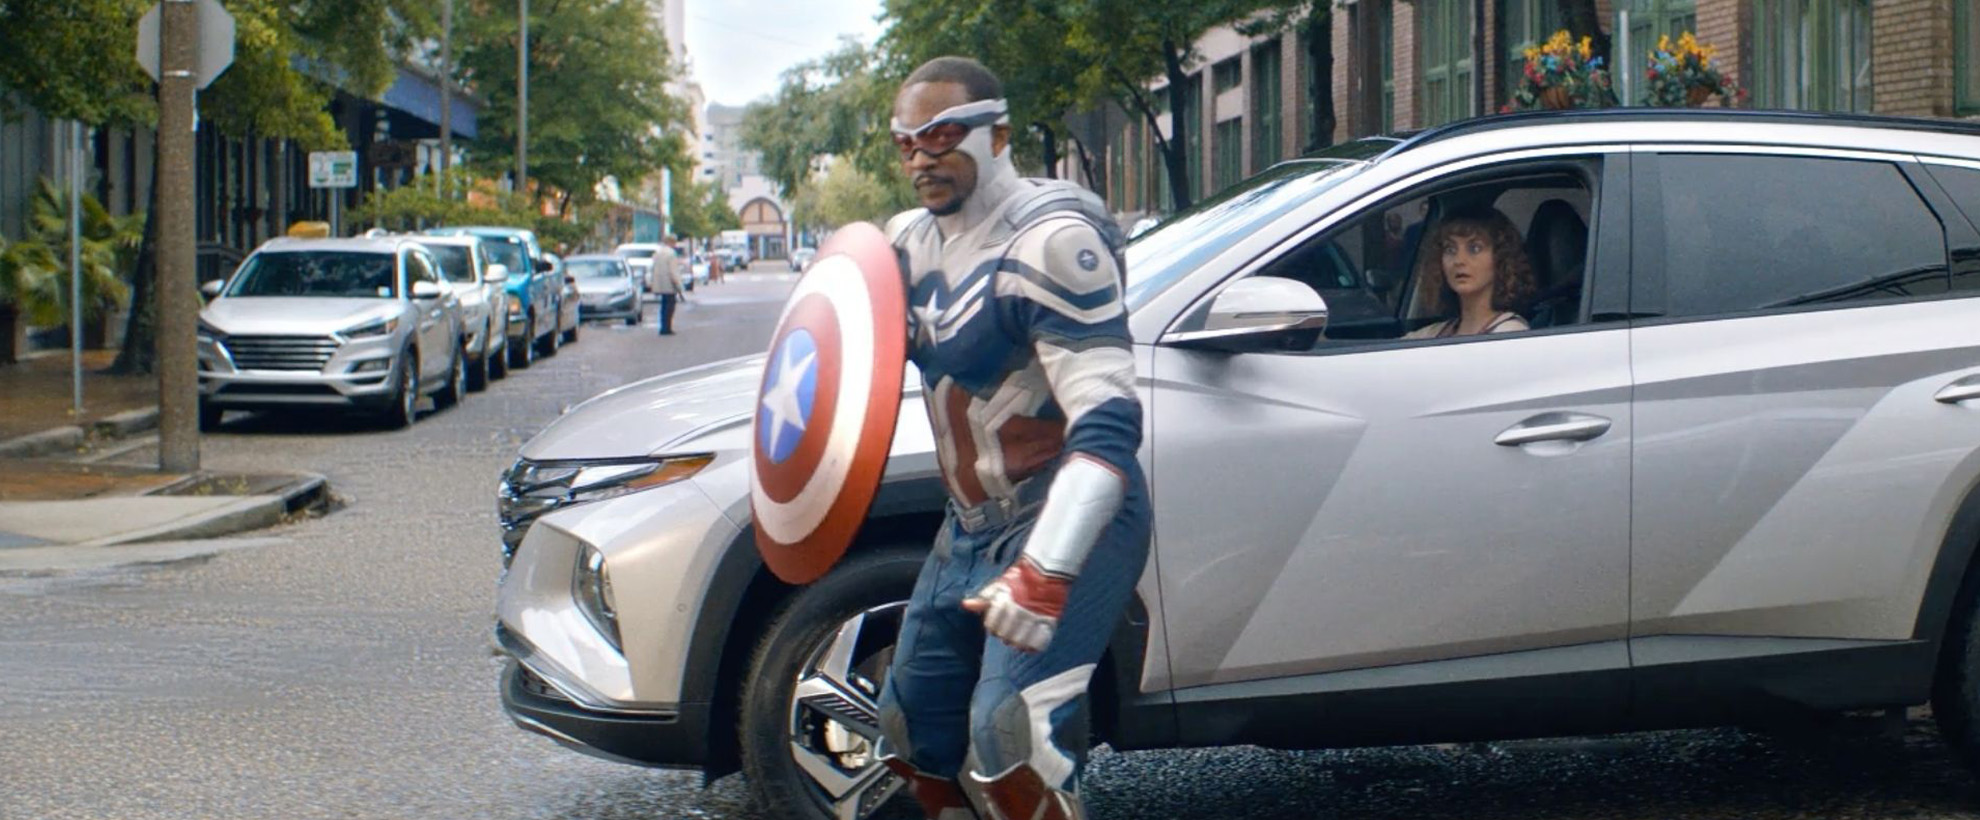 Captain America holding his shield standing in front of a silver car in the middle of the street.